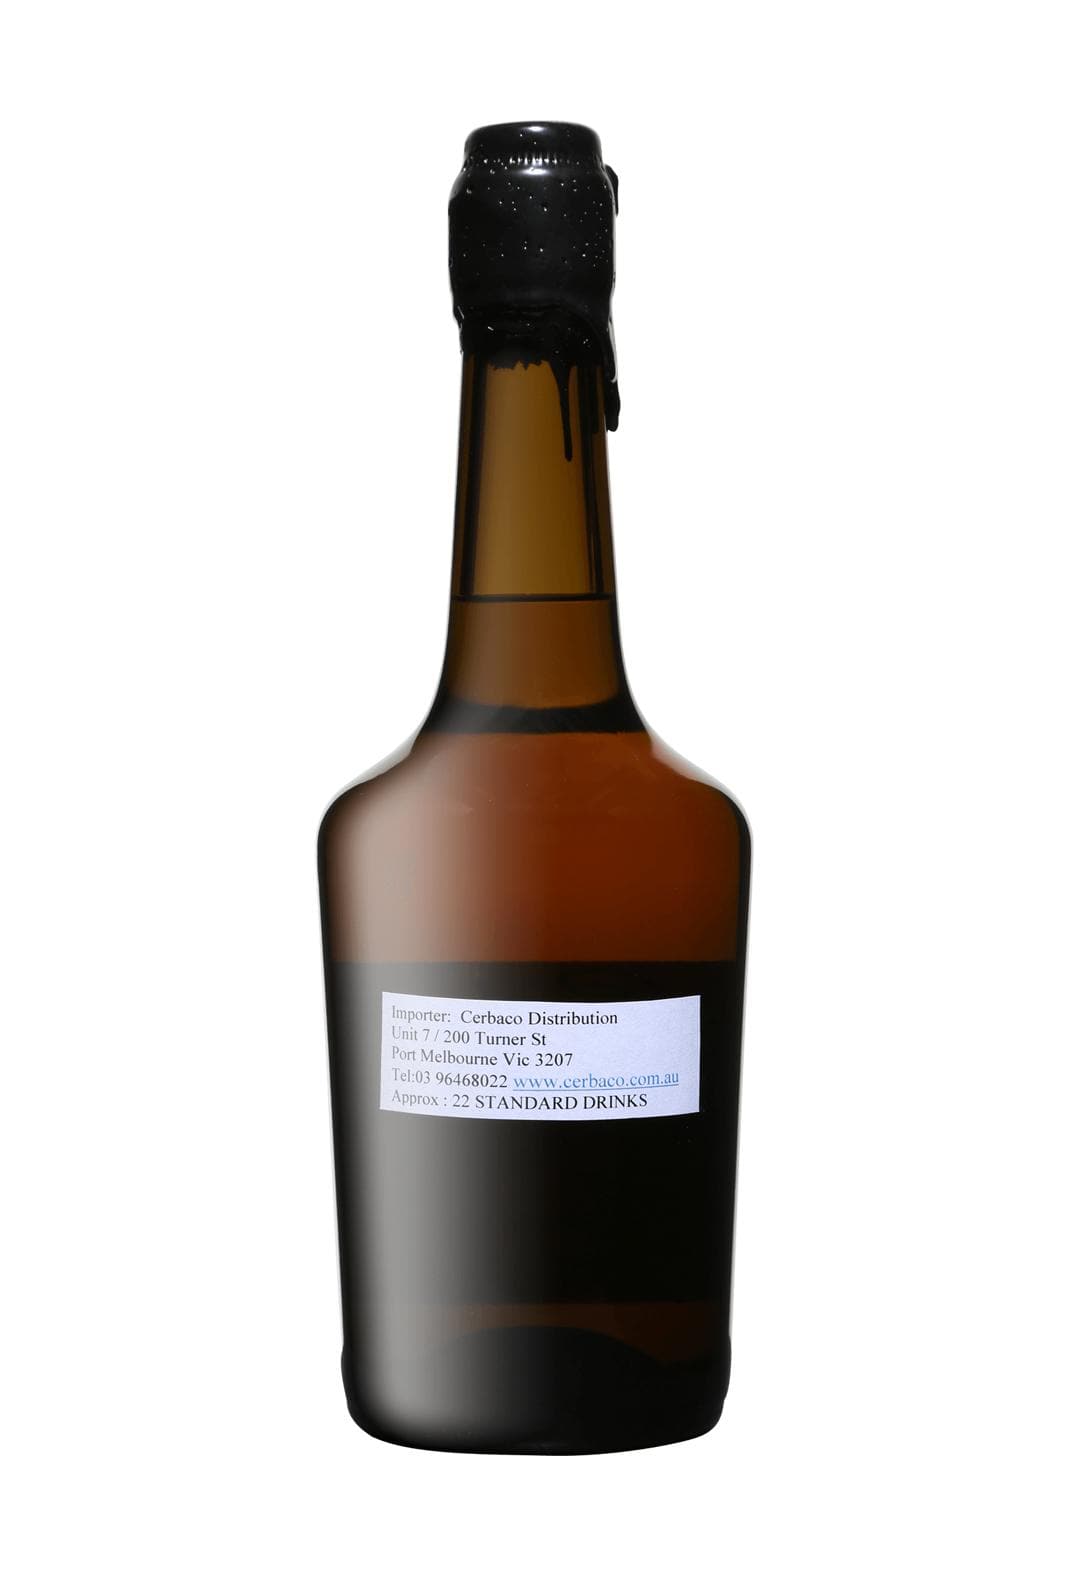 Adrien Camut Calvados 'Reserve d'Adrien' 35-40 years Pays D'Auge 40% 700ml | Brandy | Shop online at Spirits of France